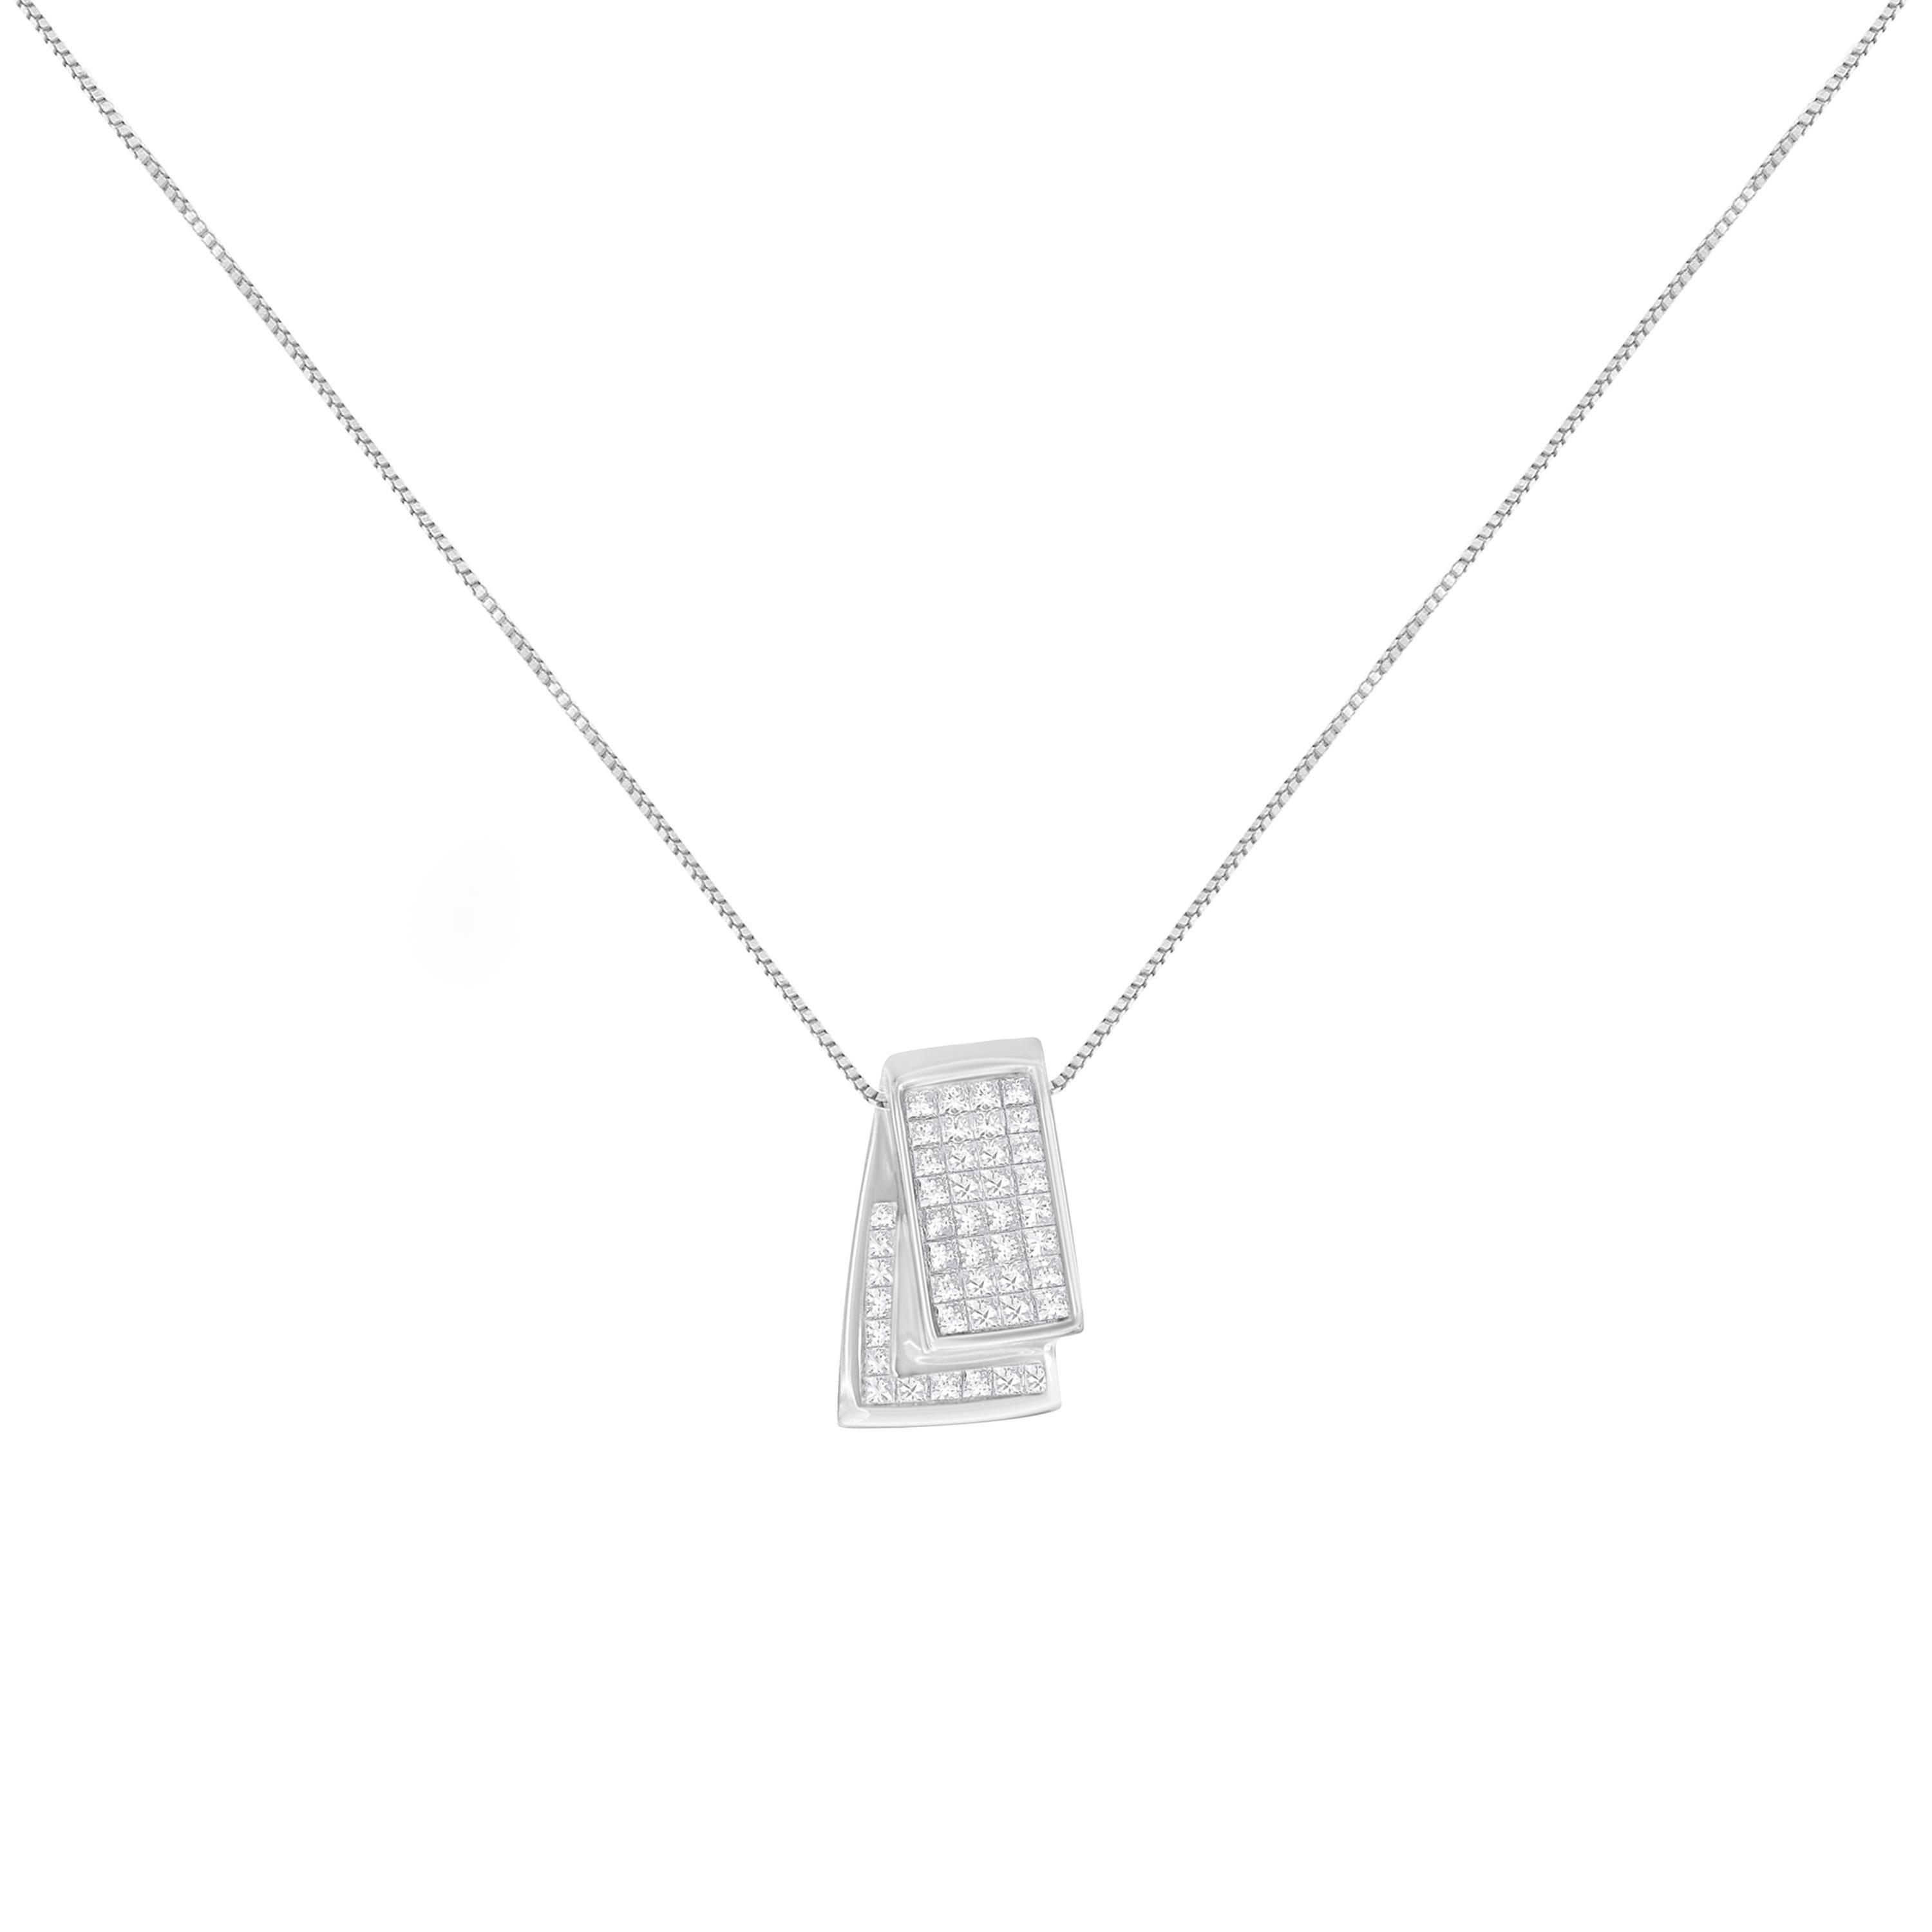 Hanging from a delicate 18 inch box chain, this necklace is a 14k white gold pendant. With a unique folded design, the pendant is inlaid with princess cut diamonds that perfectly catch the light and make it sparkle. These natural diamonds are color